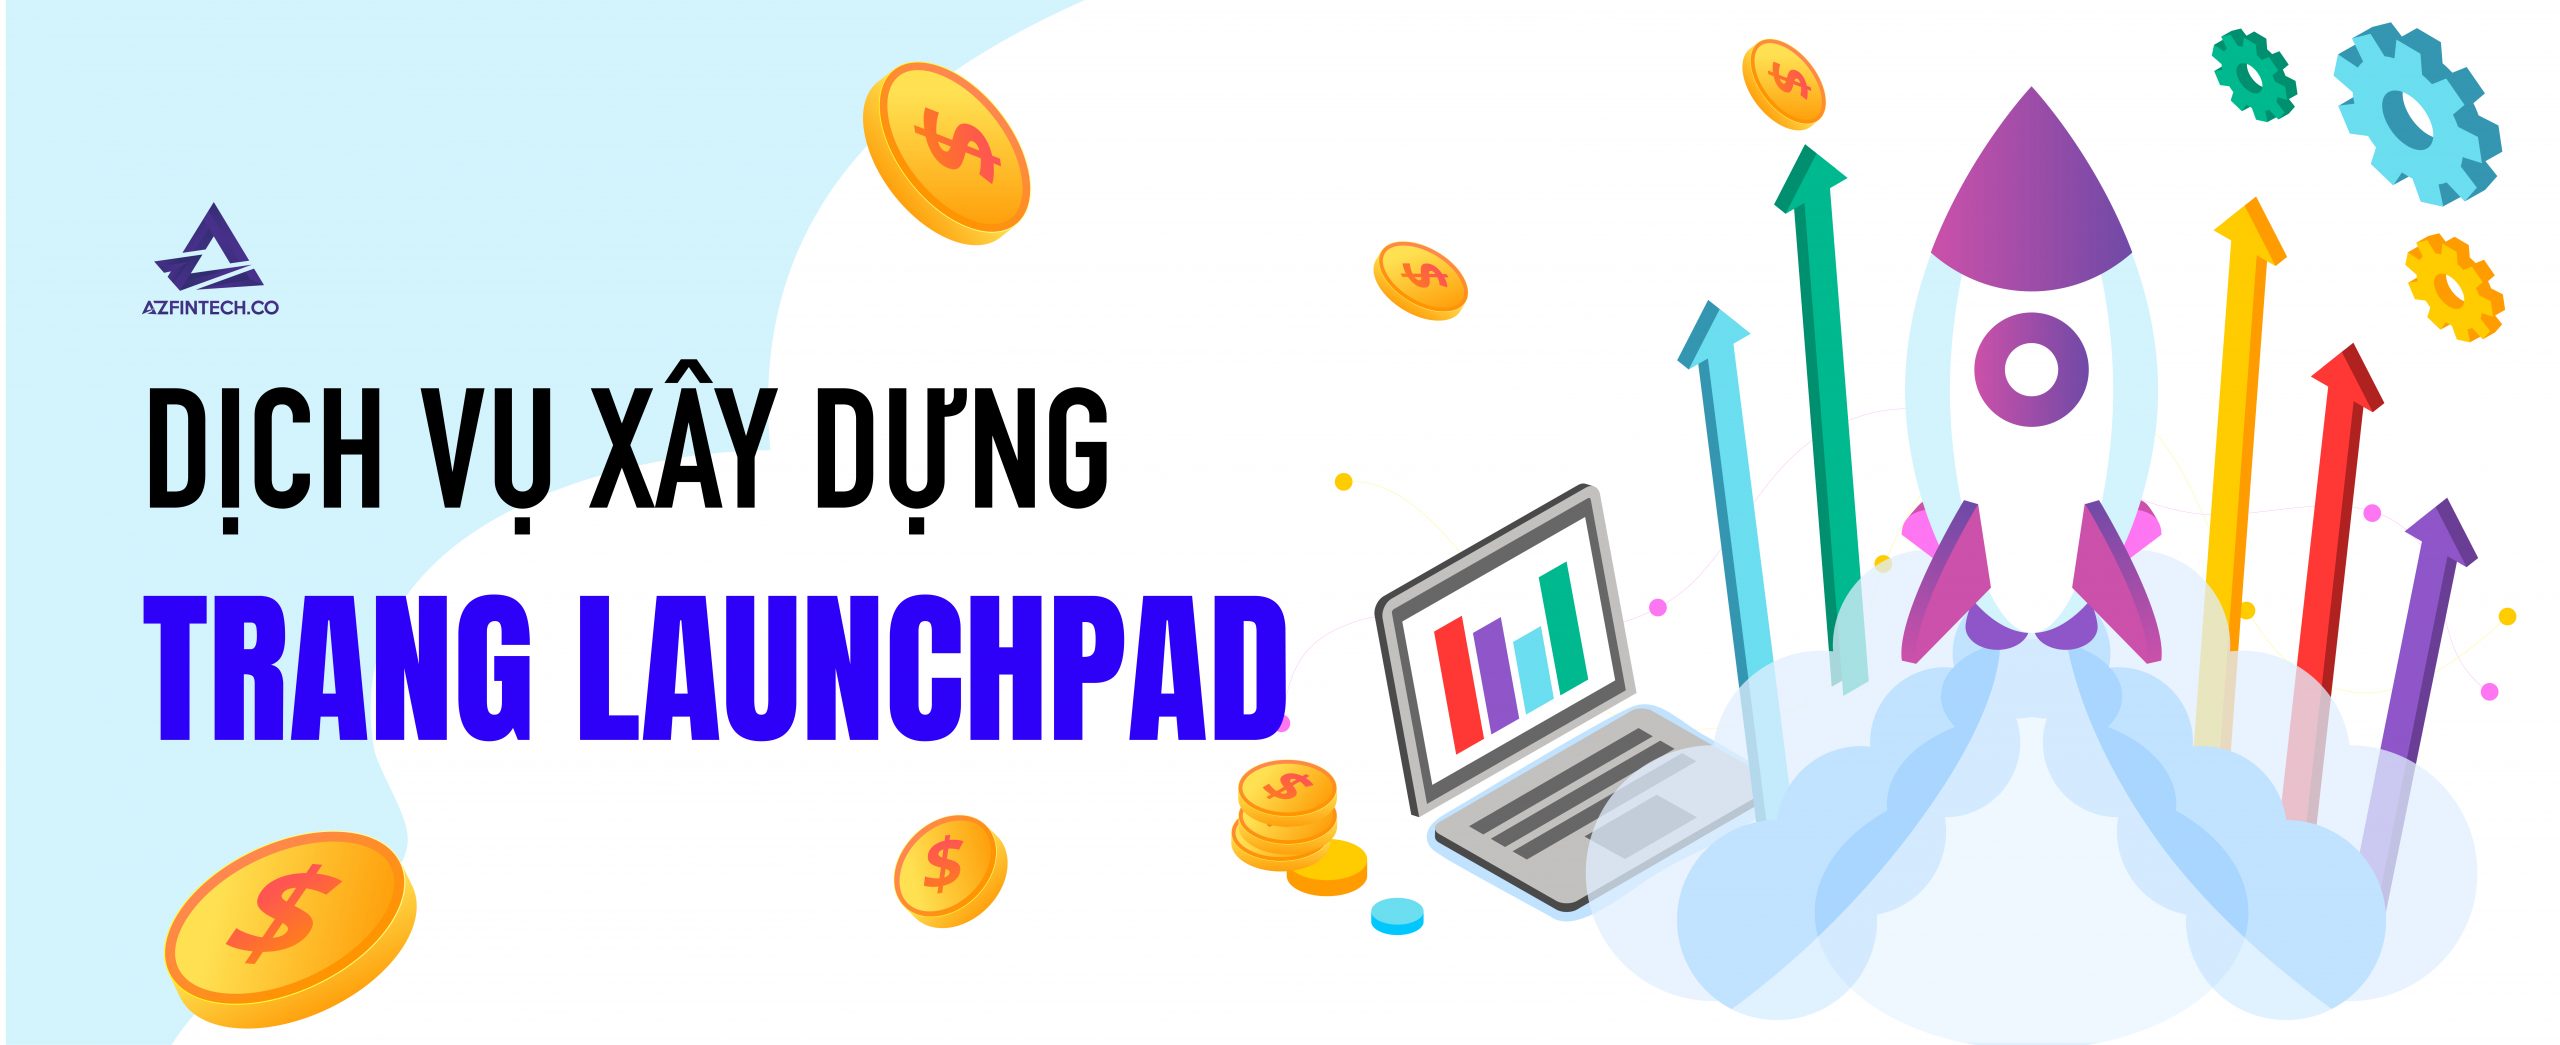 Xây dựng trang Launchpad Blockchain Crypto